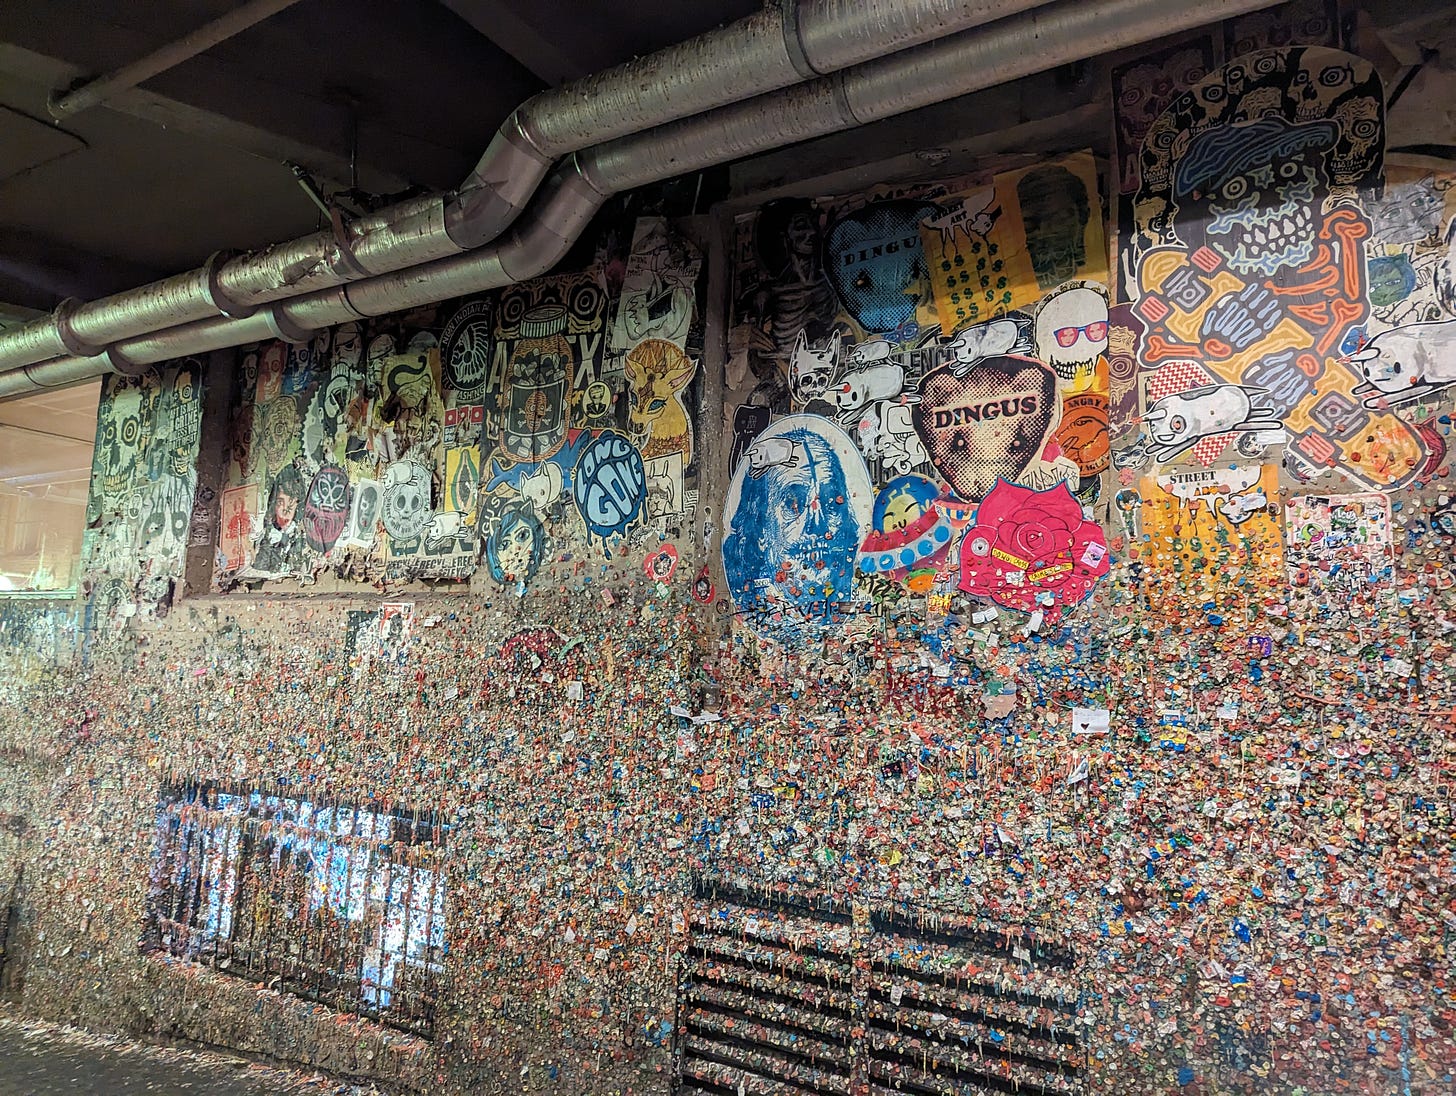 An alleyway in Seattle that is literally covered in gum. Bright speckled gum covers the walls, along with awesome punk art, like Benjamin Franklin's face made to look like a skull.